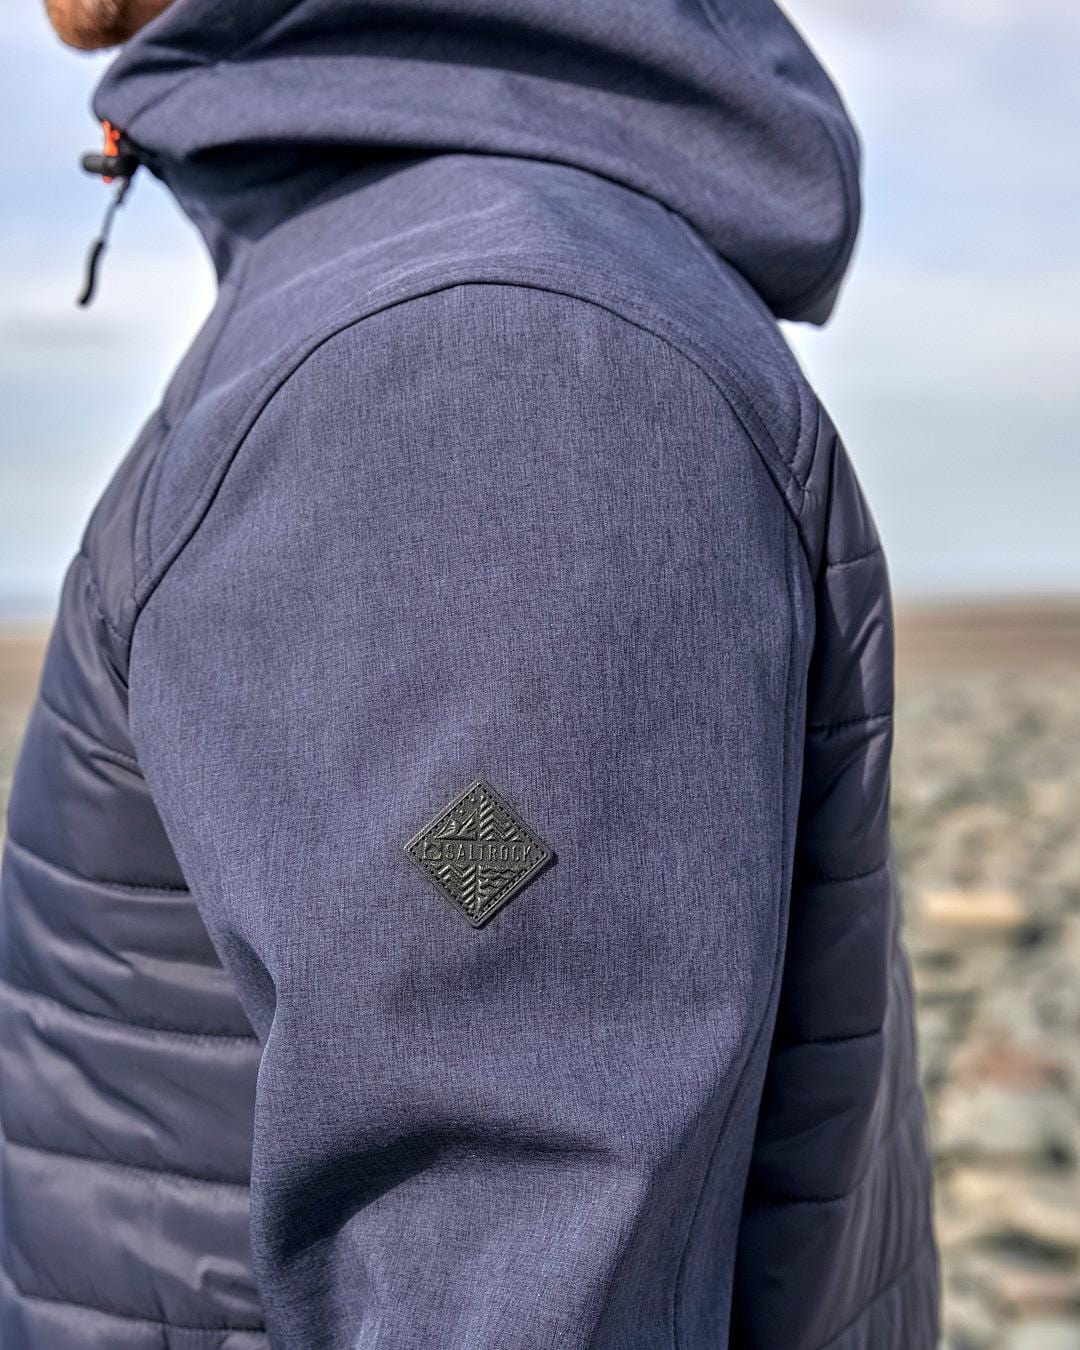 The back of a man in a Saltrock Purbeck Padded Jacket - Dark Blue standing on the beach.